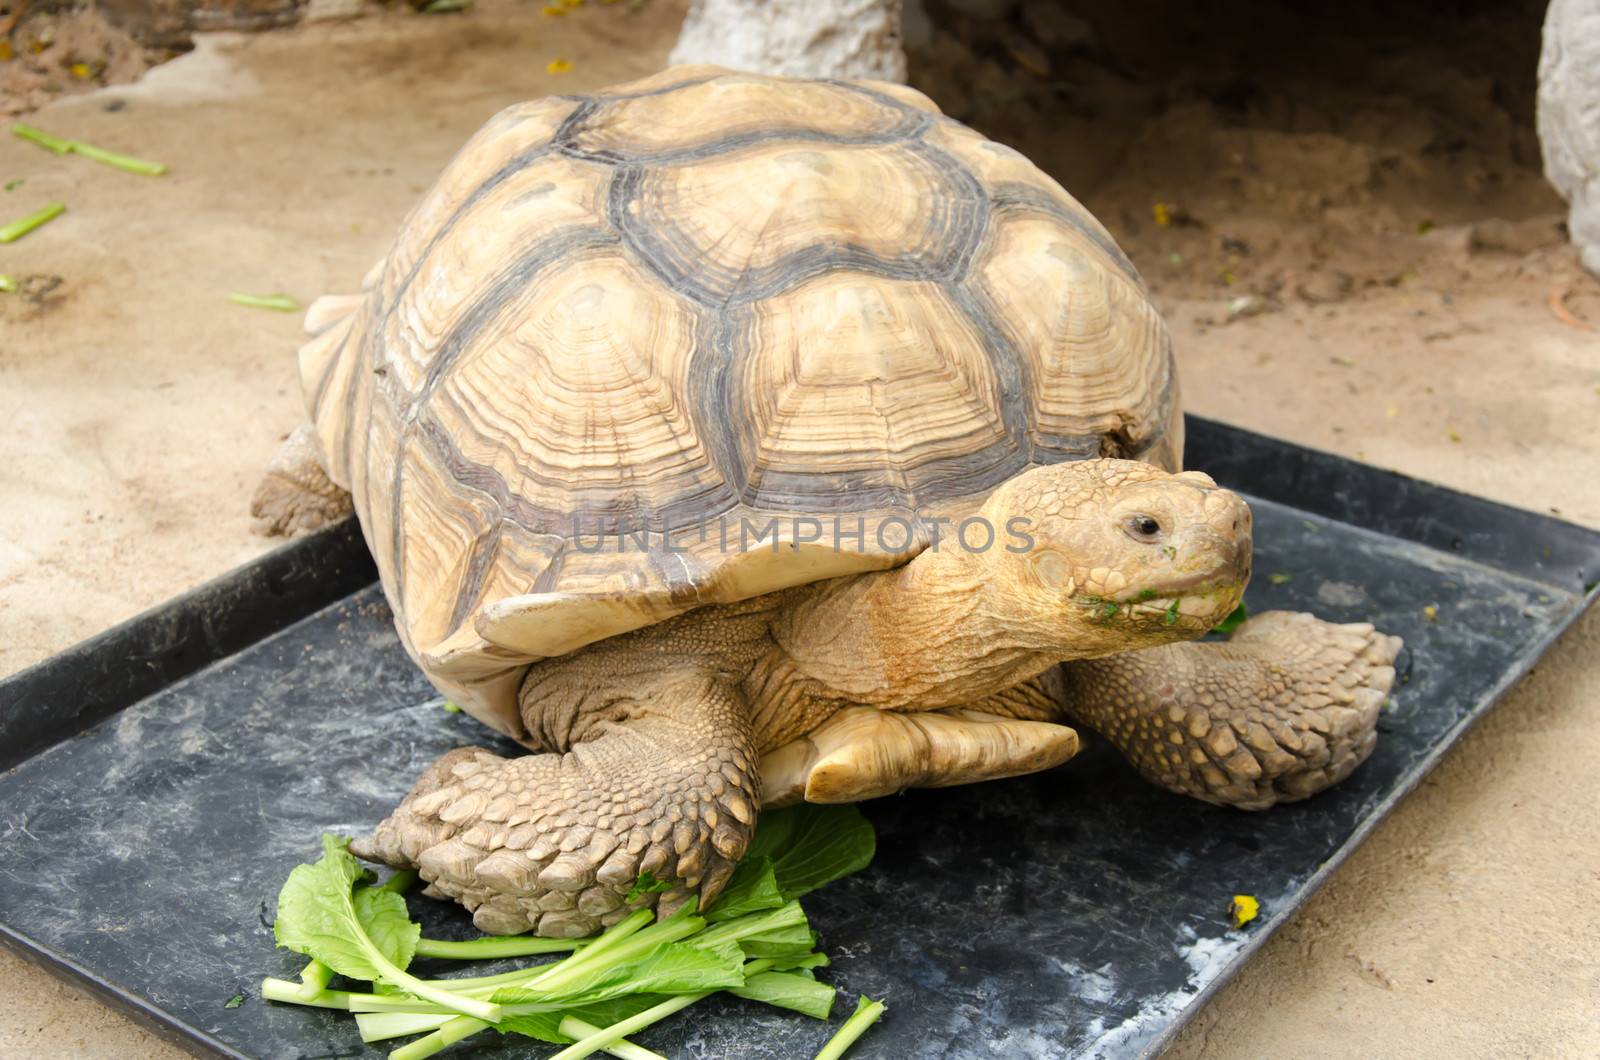 A large the golden turtle eating a vegetables.